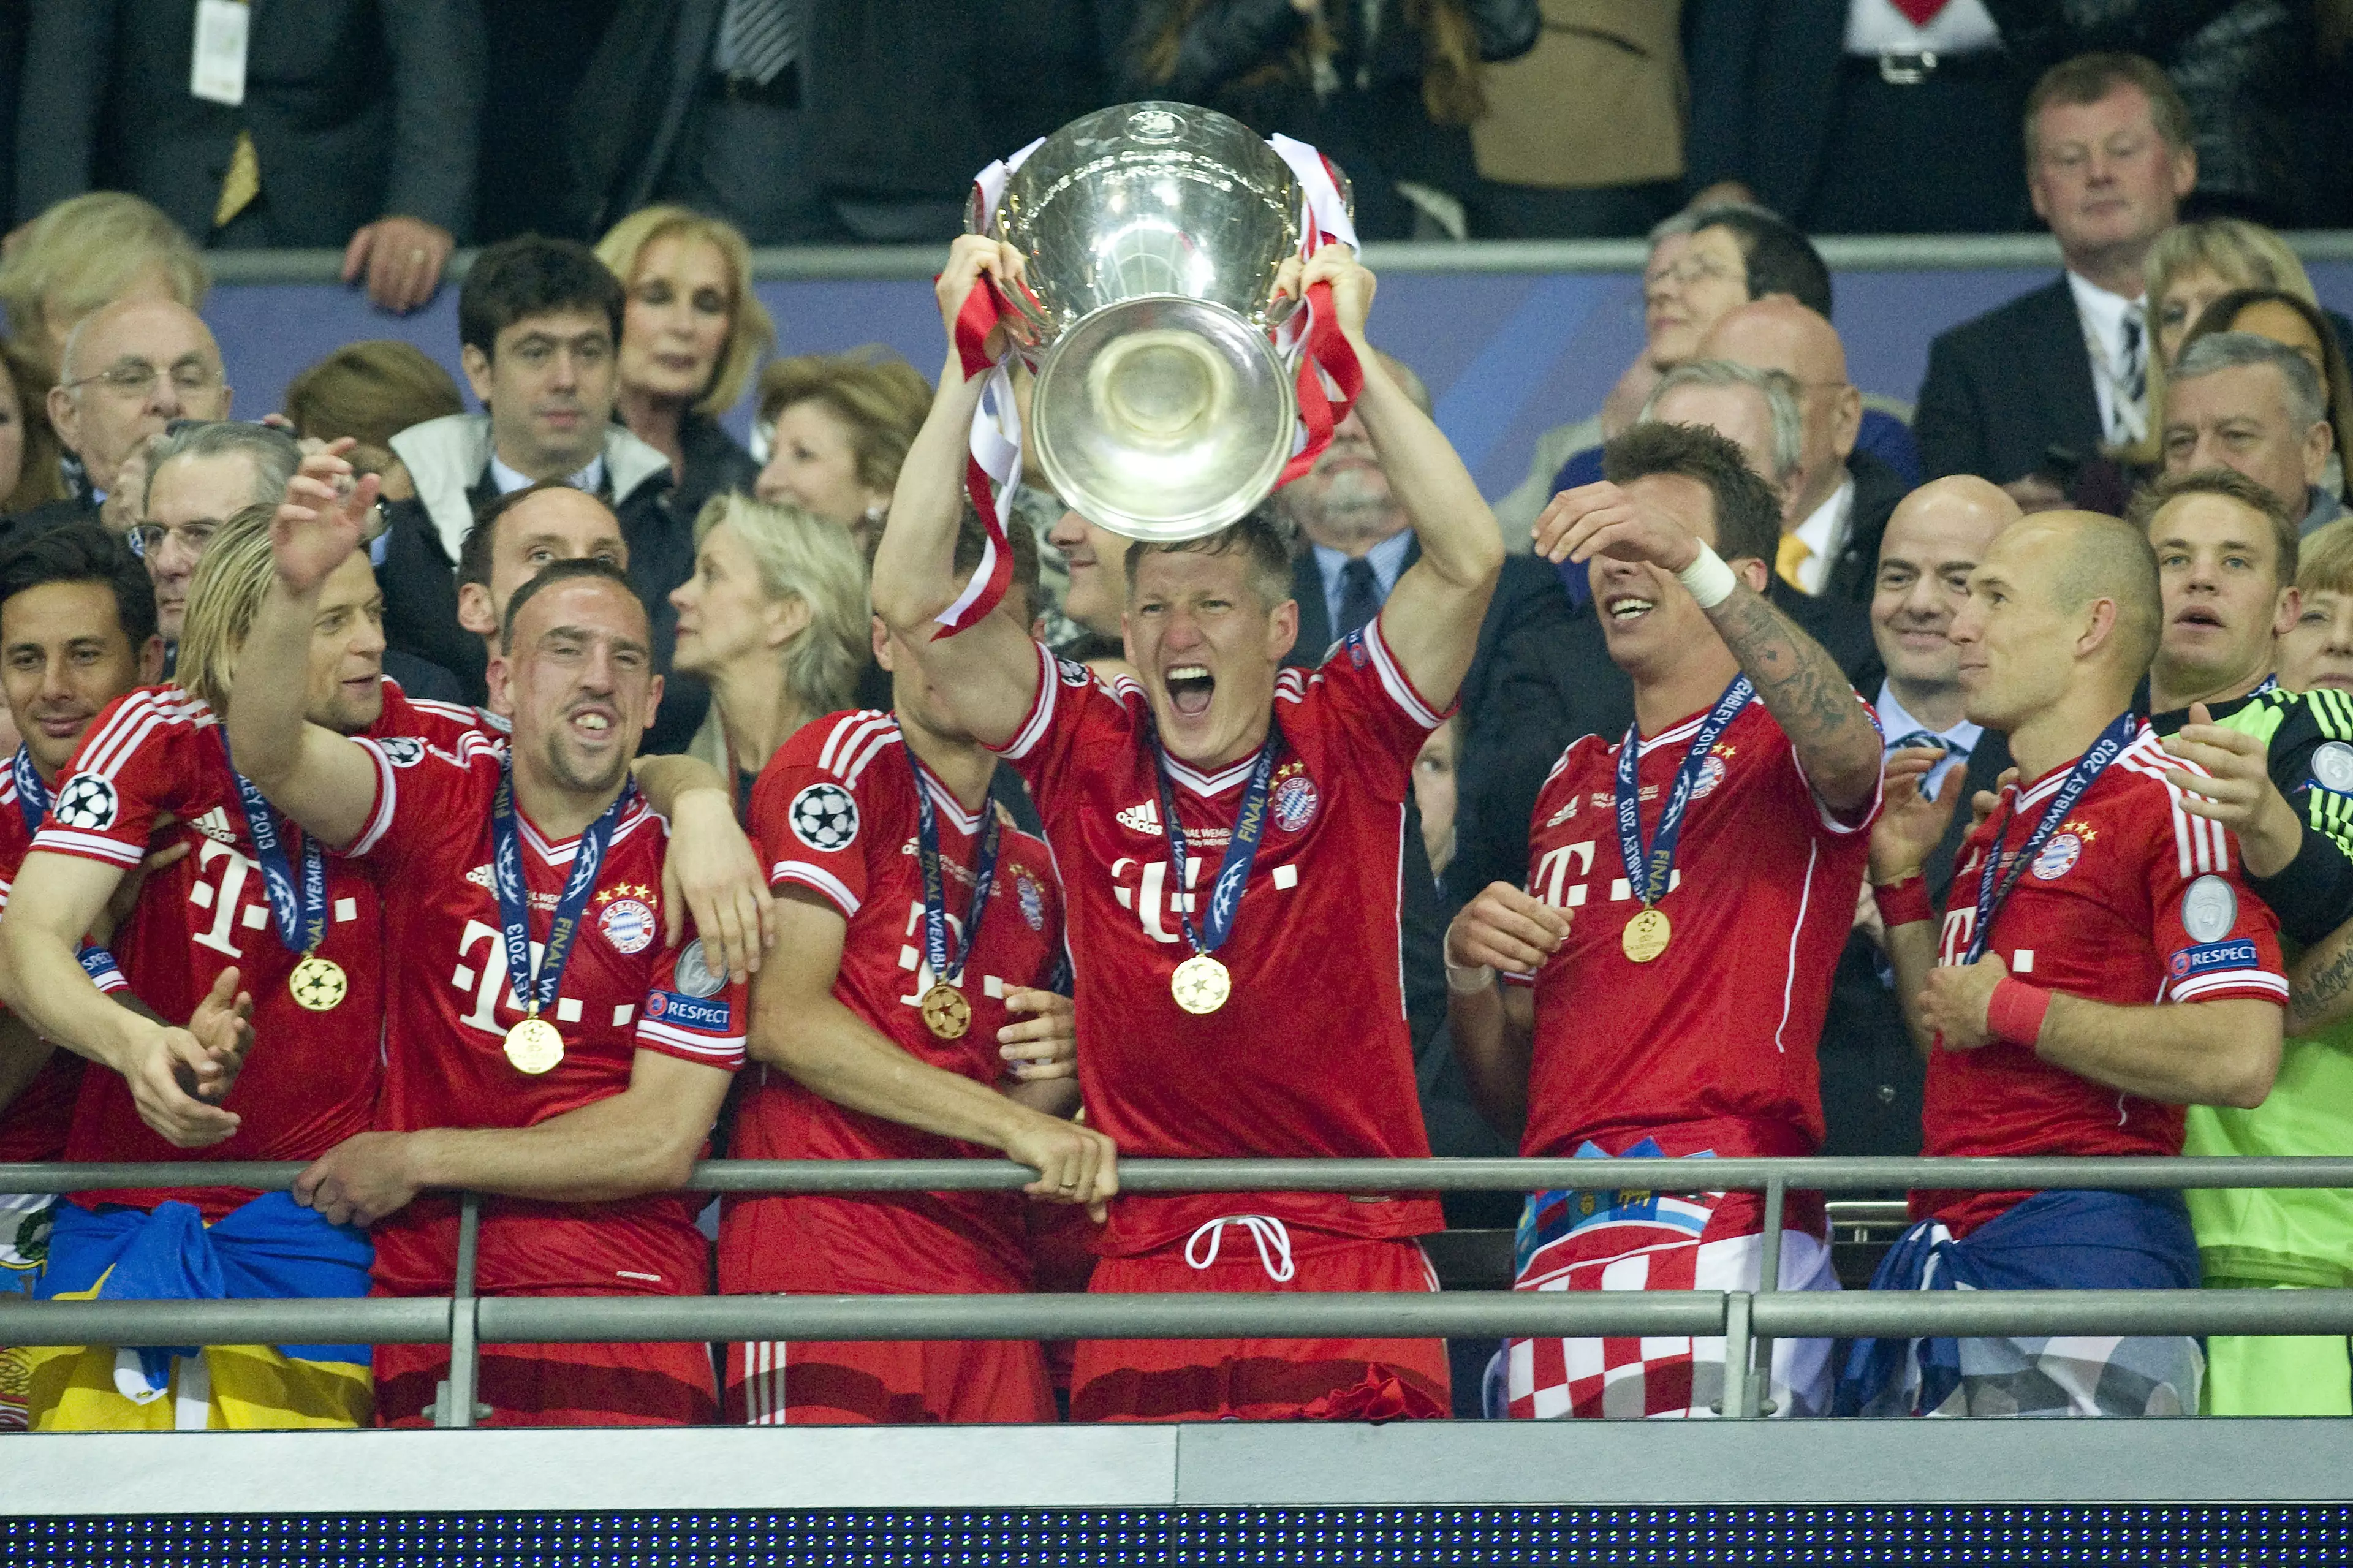 Bayern beat Borussia Dortmund in the most recent Wembley final. Image: PA Images